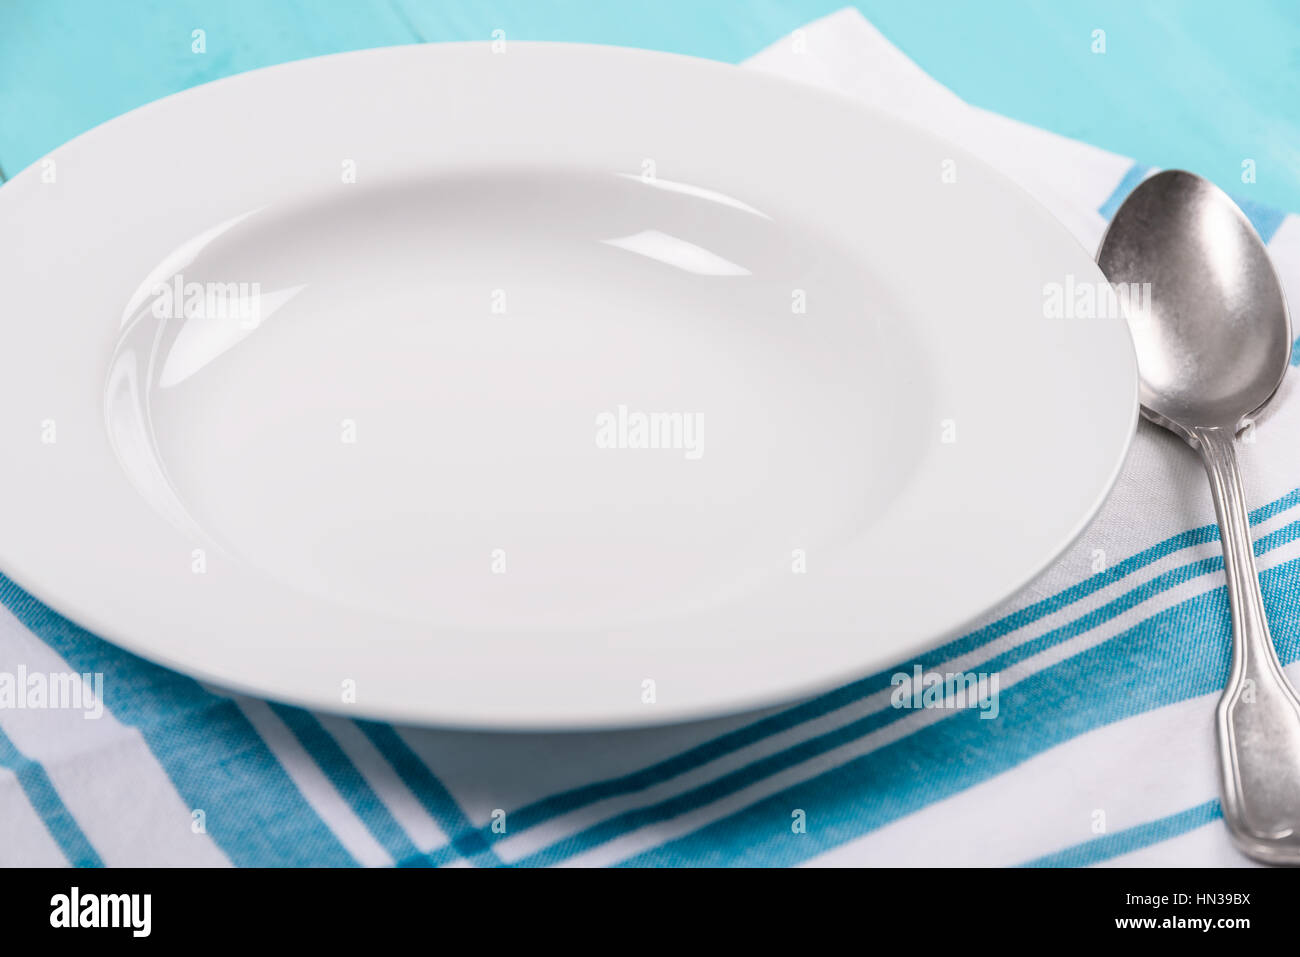 Empty White Plate With Blue Napkin And Spoon On Table Stock Photo